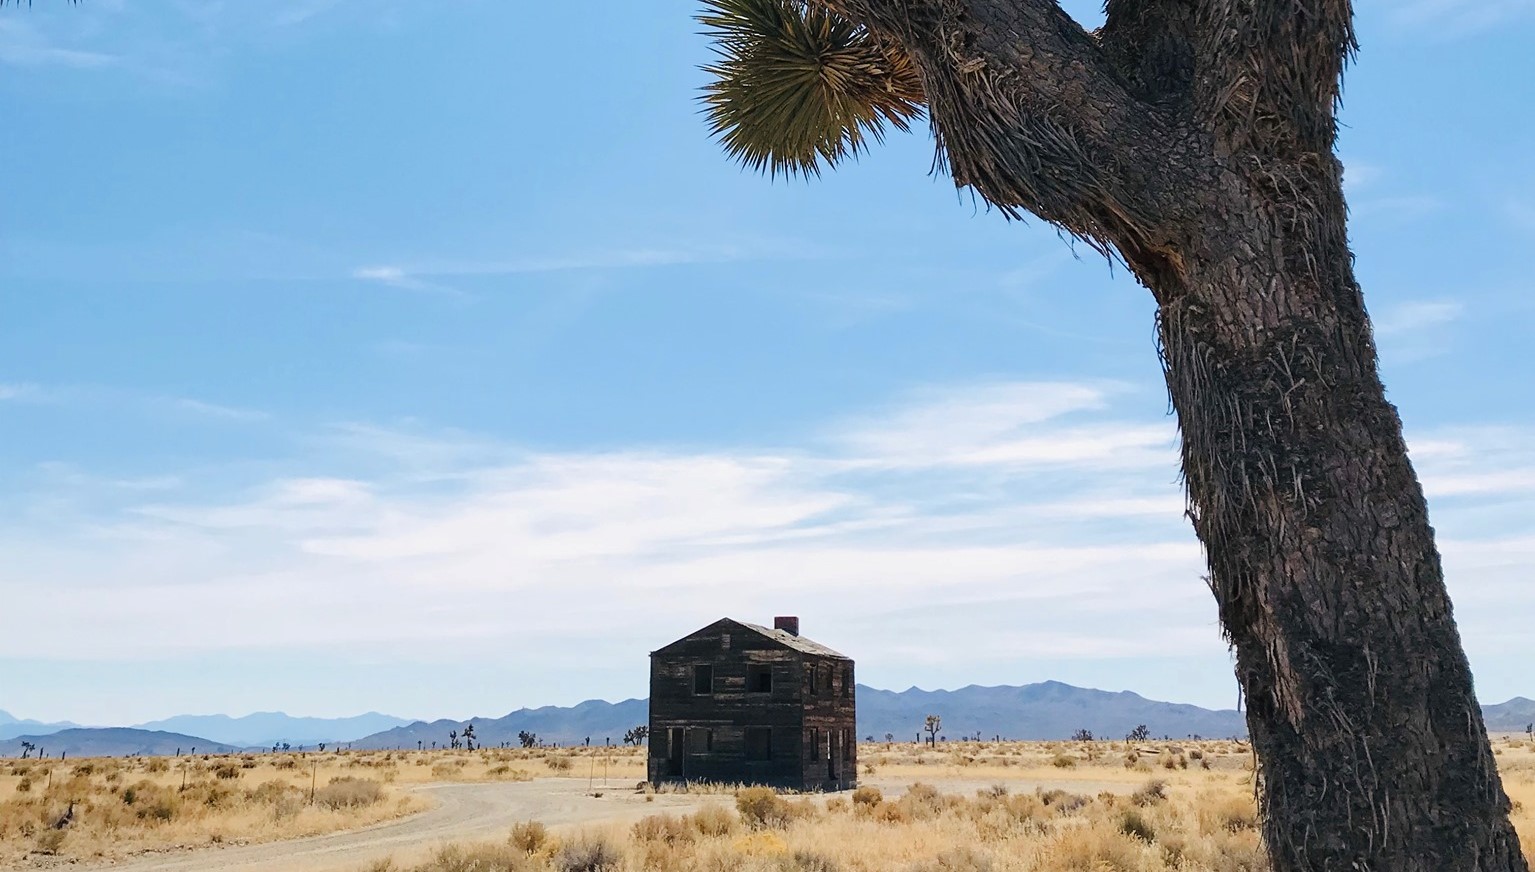 The Apple II house structure pictured with a Joshua Tree in the foreground.